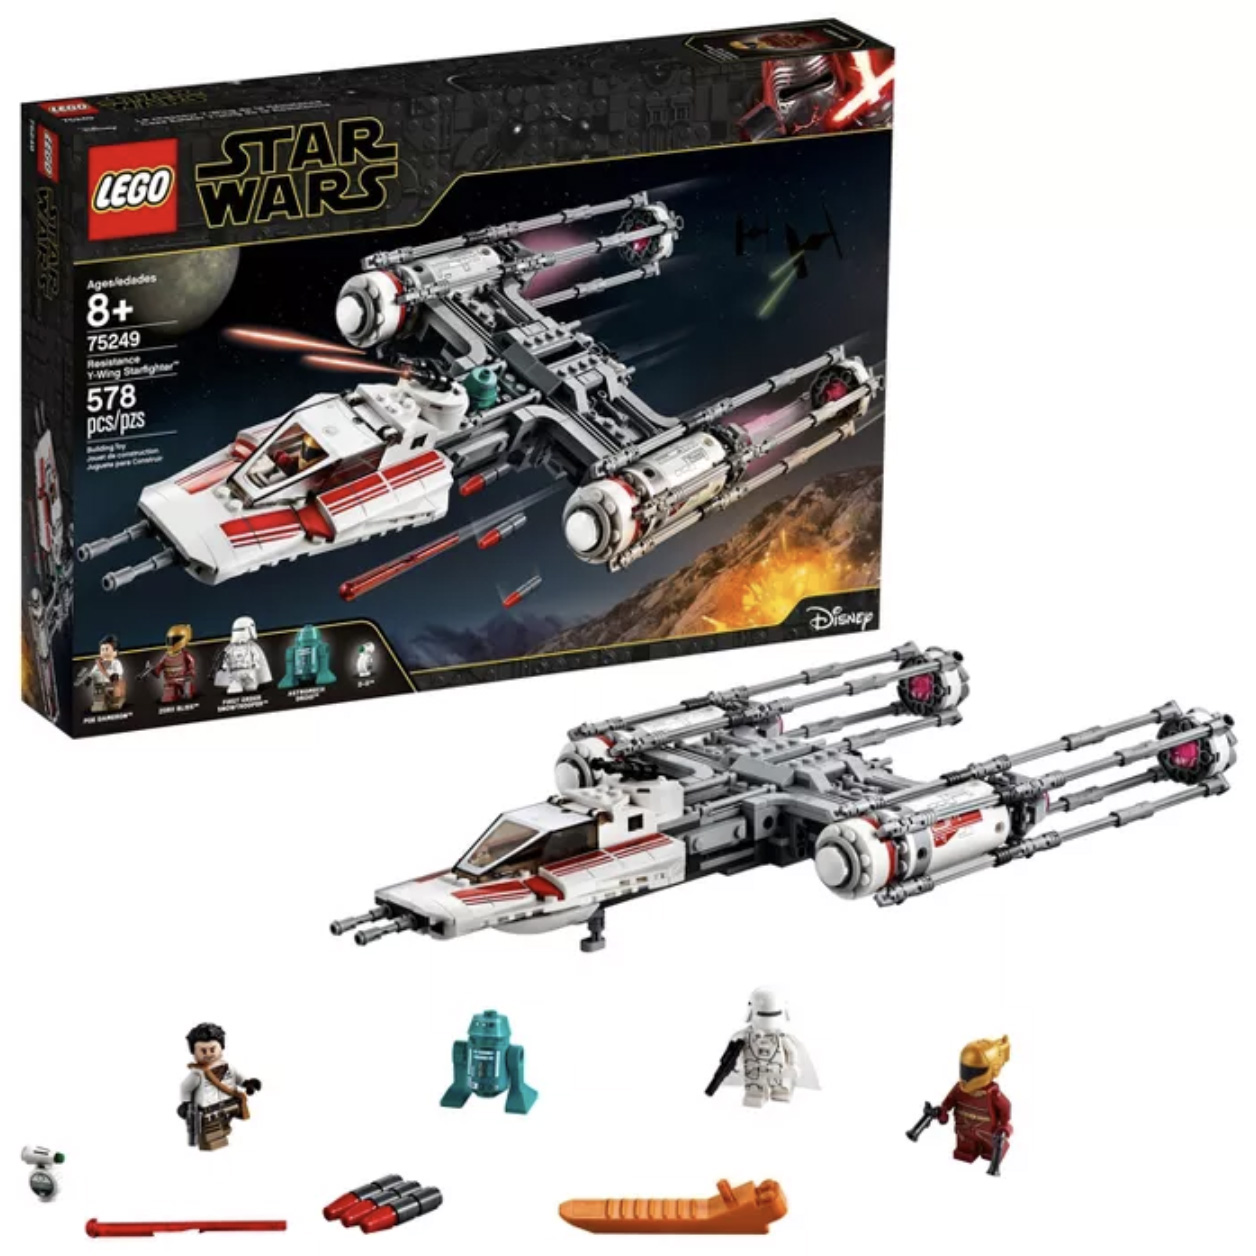 LEGO Star Wars: The Rise of Skywalker Resistance Y-Wing Starfighter 75249 New Advanced Collectible Starship Model Building Kit 578pc